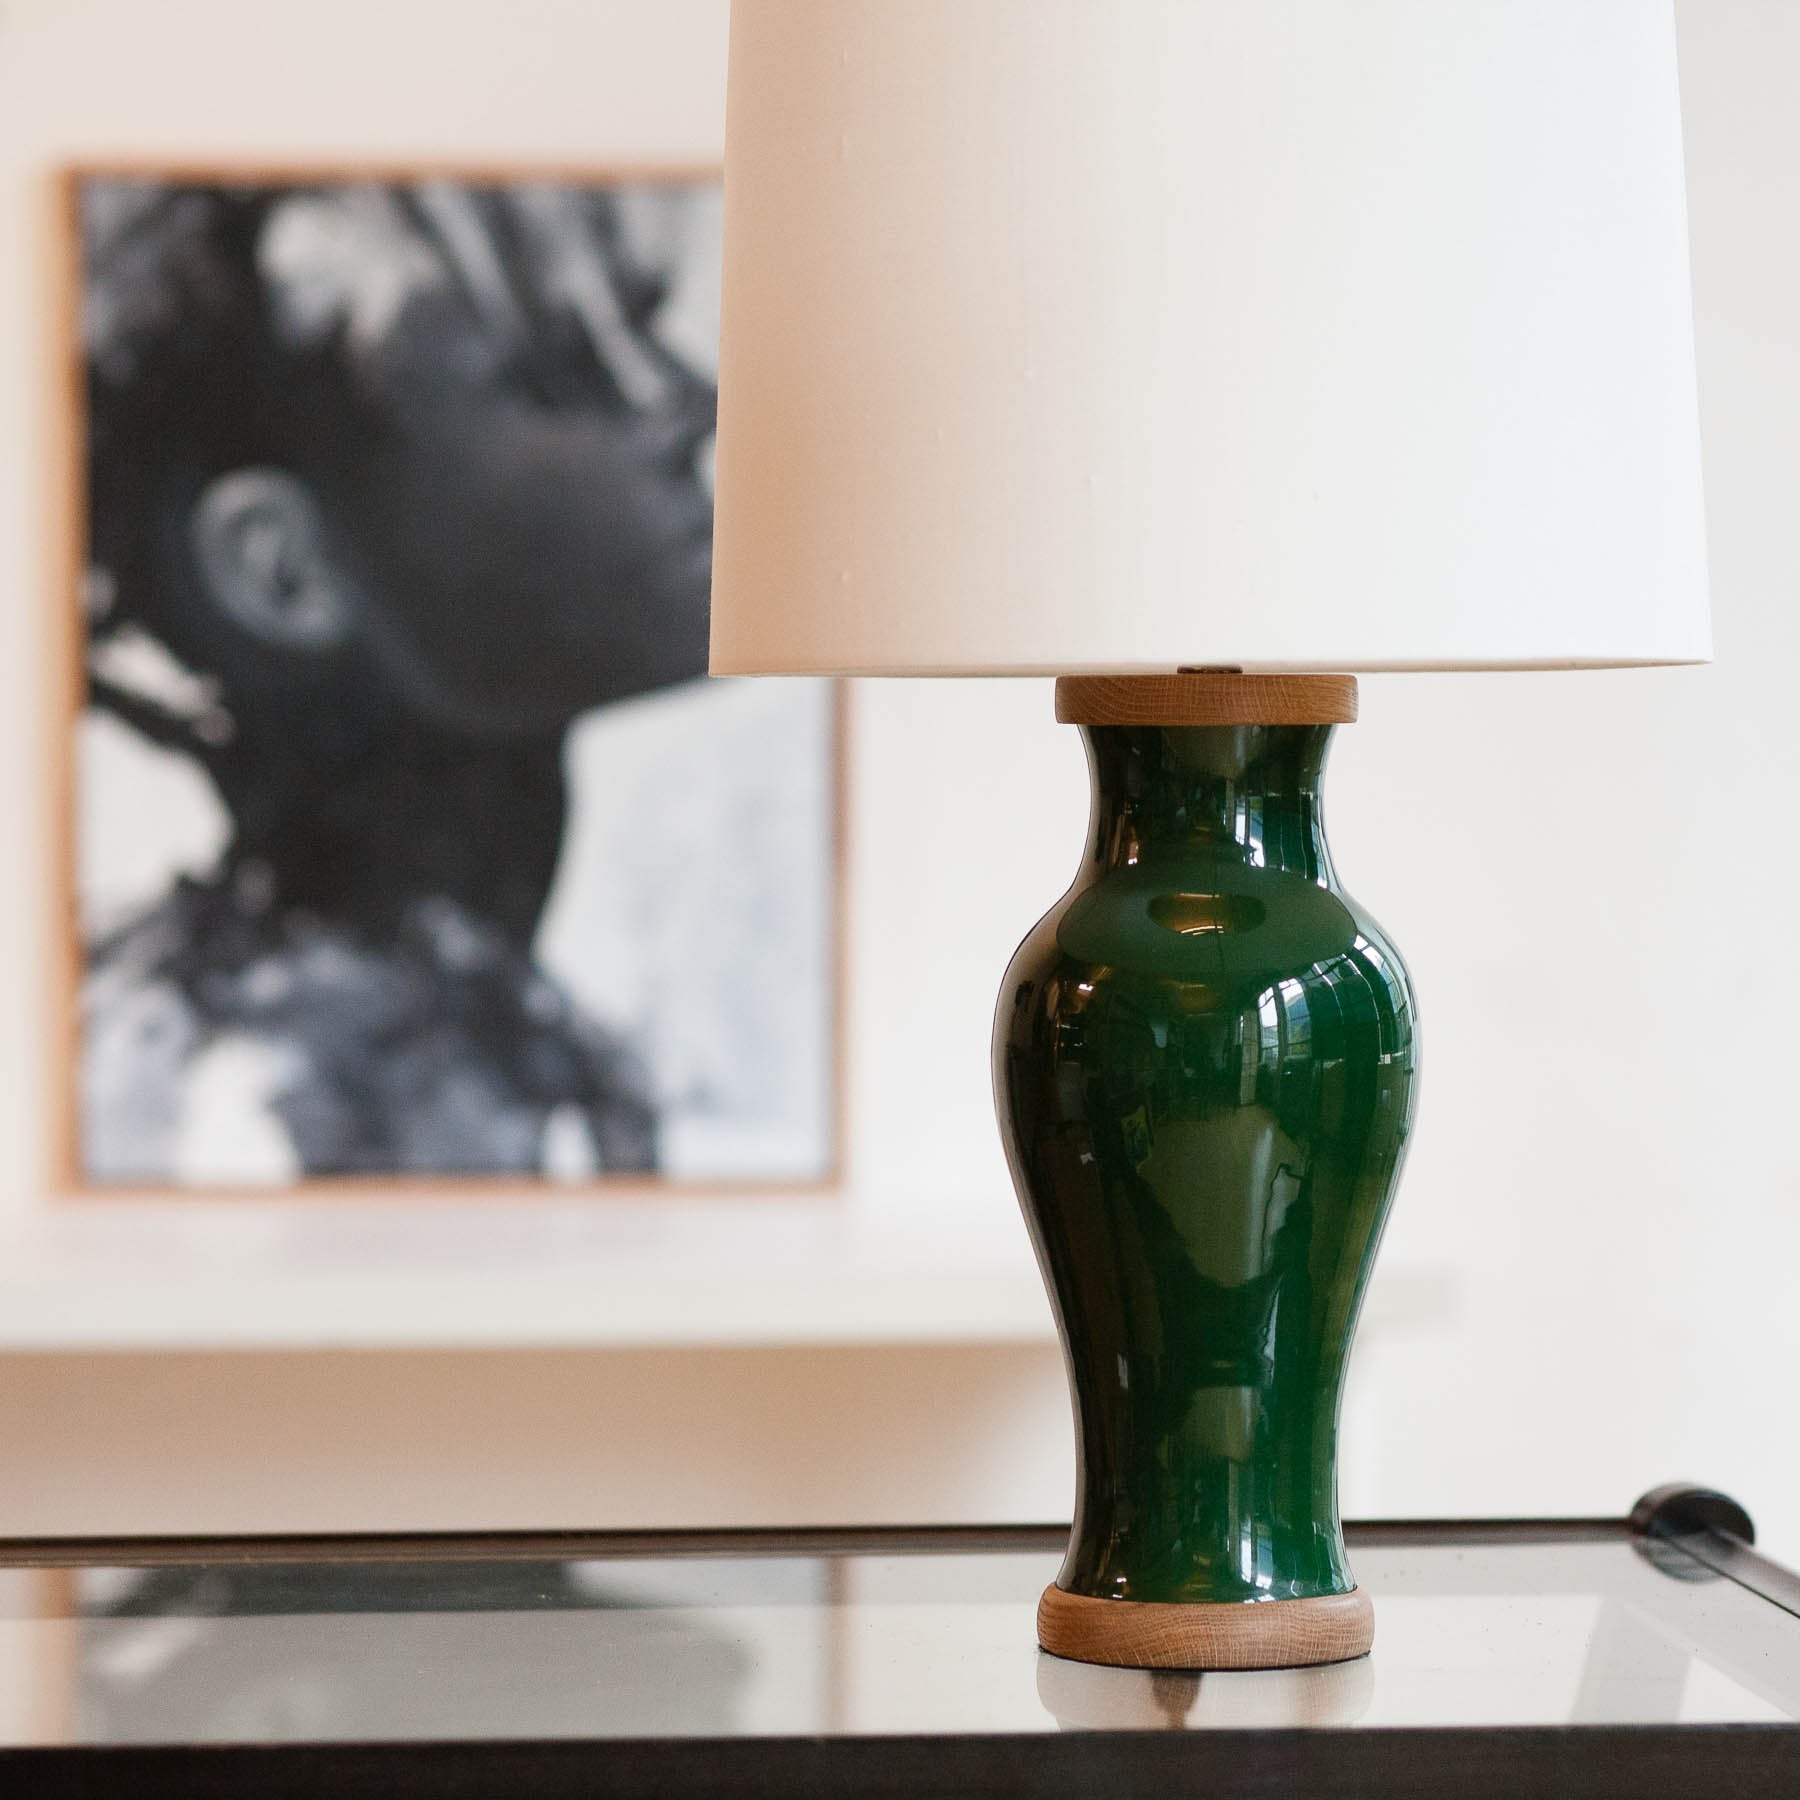 Lawrence & Scott Gabrielle Baluster Porcelain Lamp in Racing Green with Walnut Base